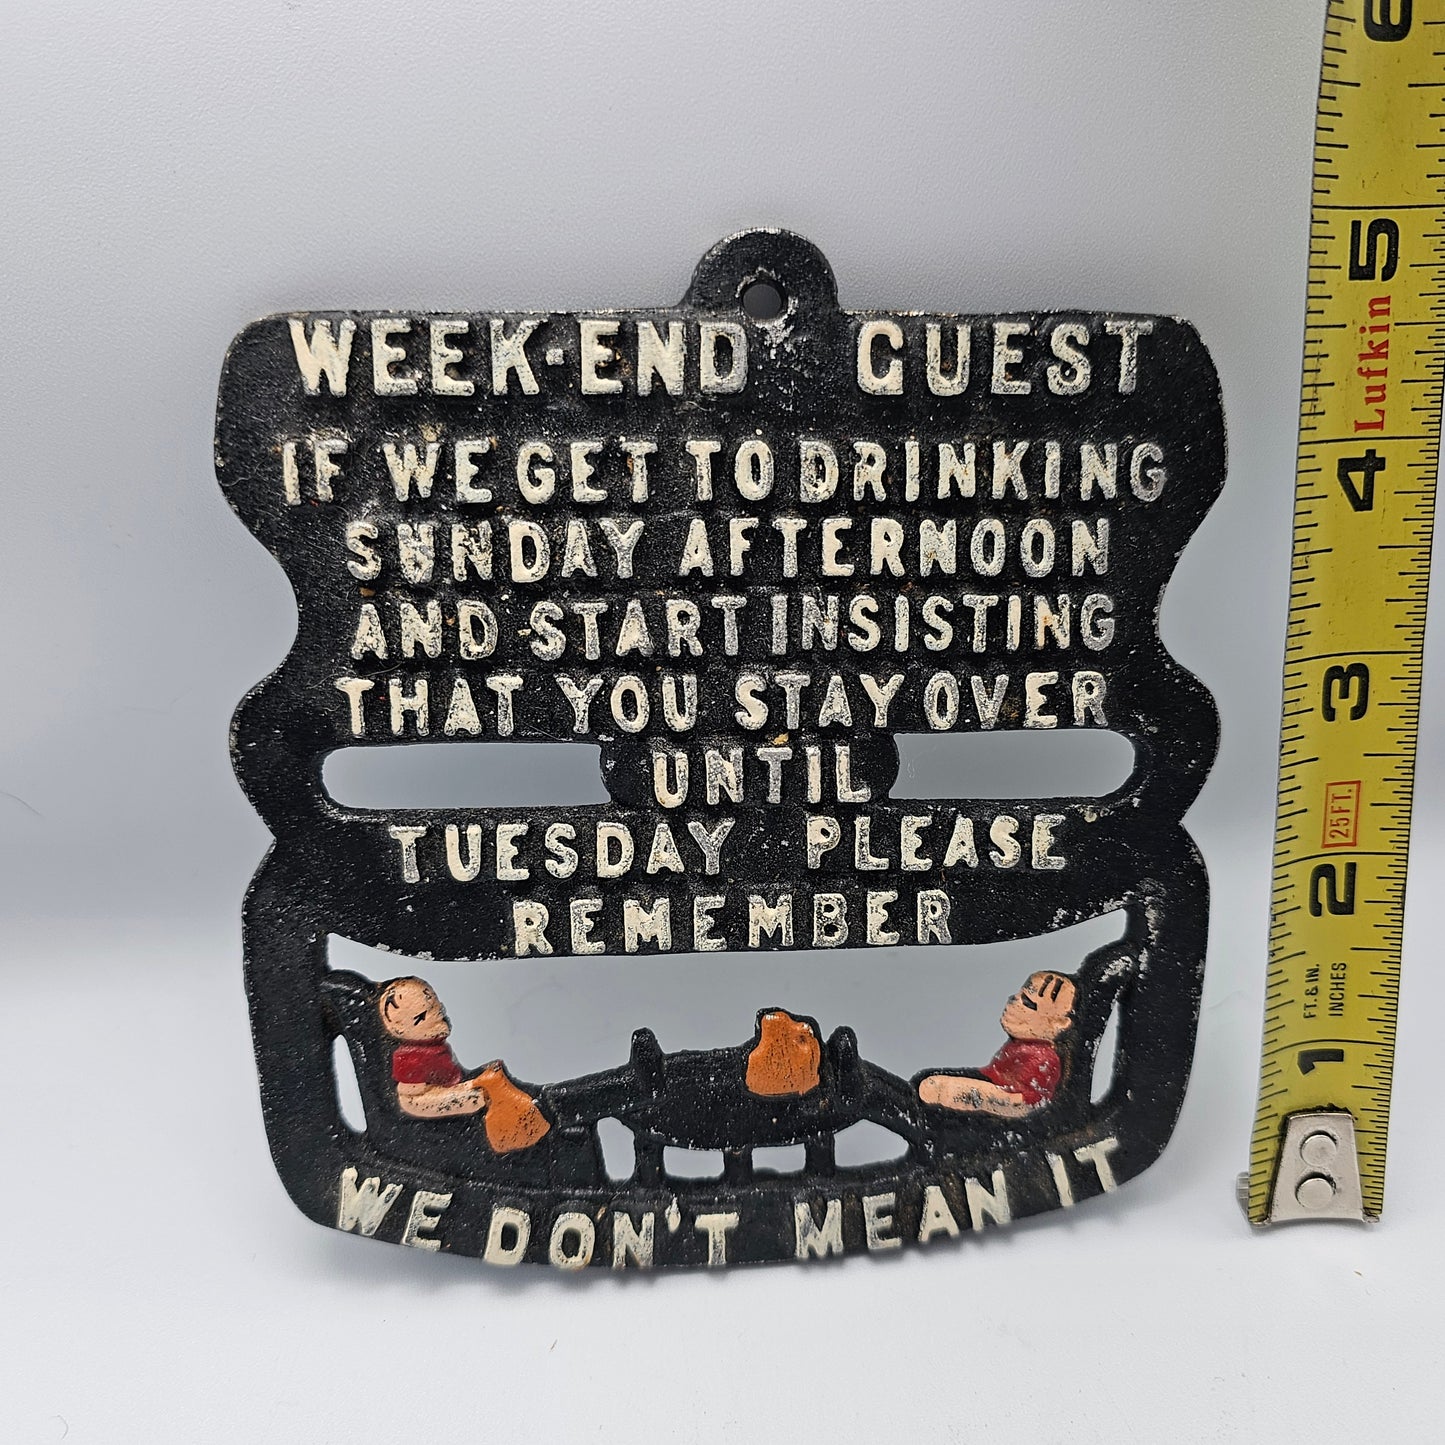 "Weekend Guest" Cast Iron Wall Hanging/Trivit